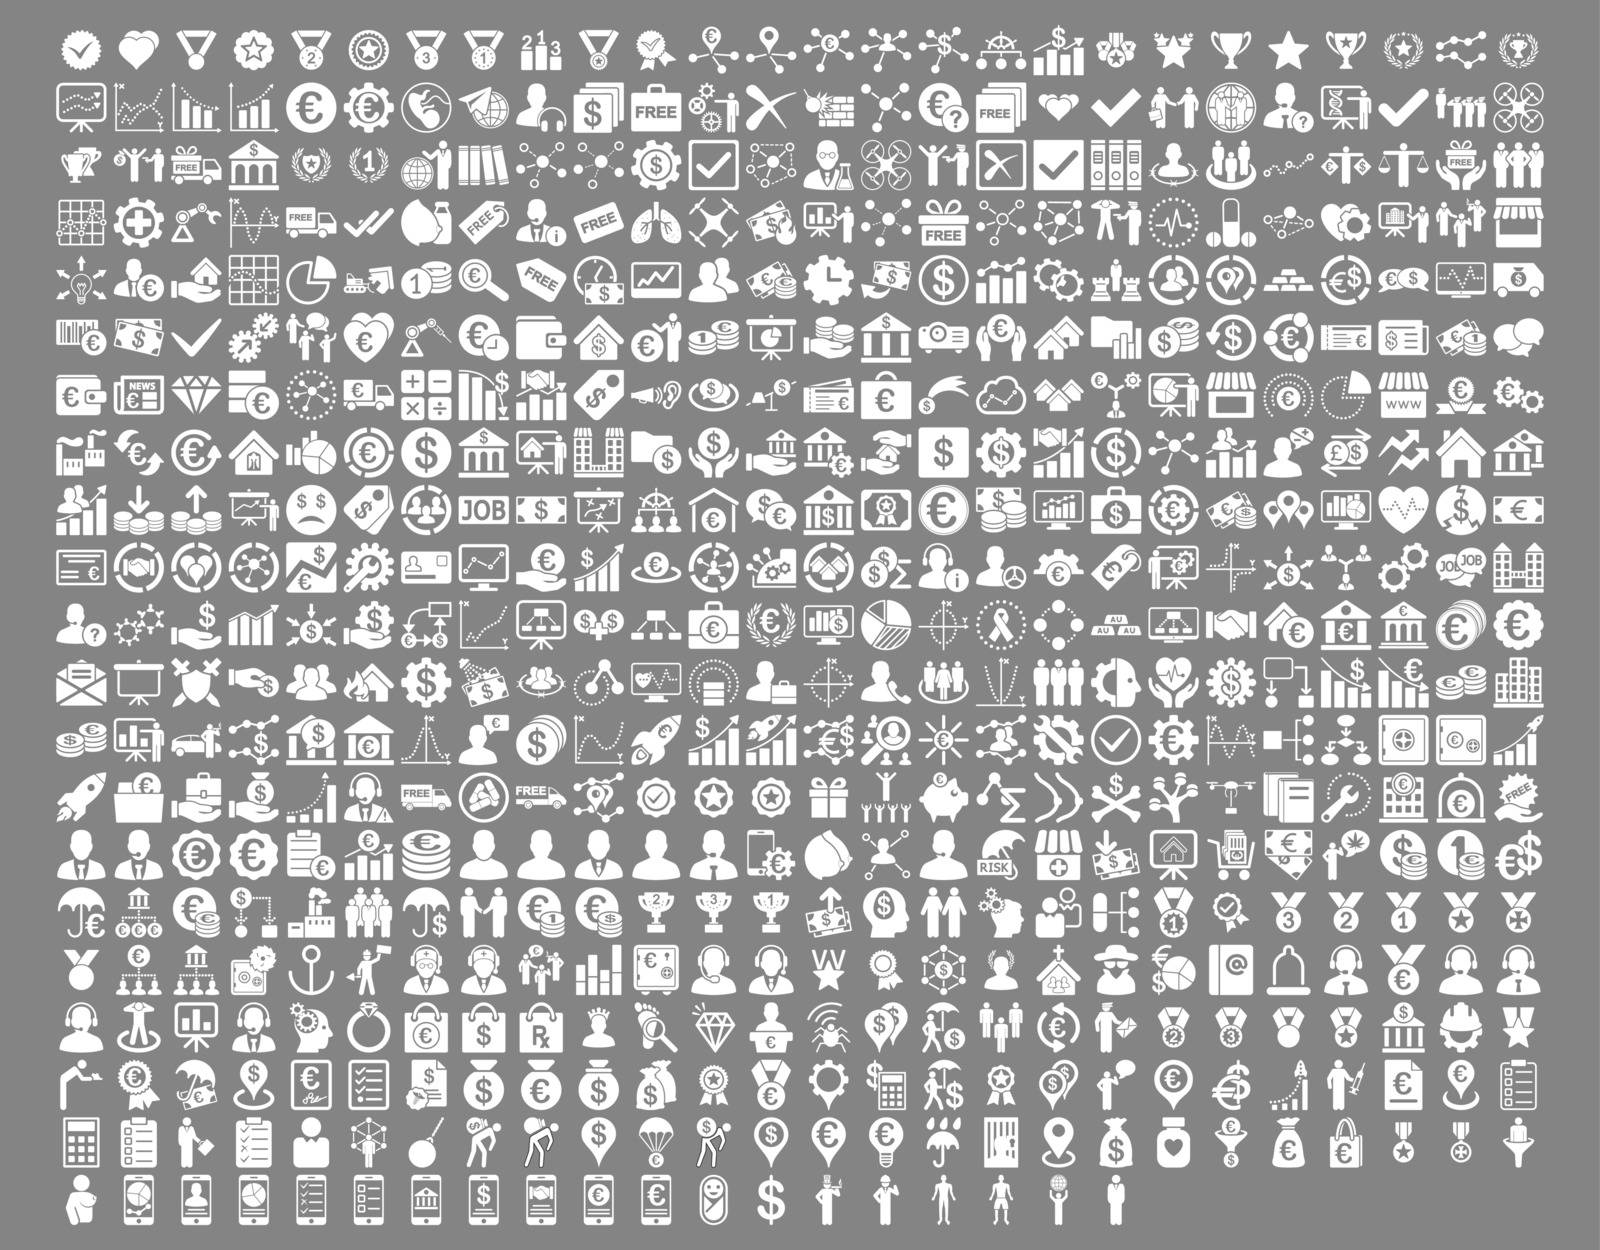 Application Toolbar Icons. 576 flat icons use white color. Vector images are isolated on a gray background. 